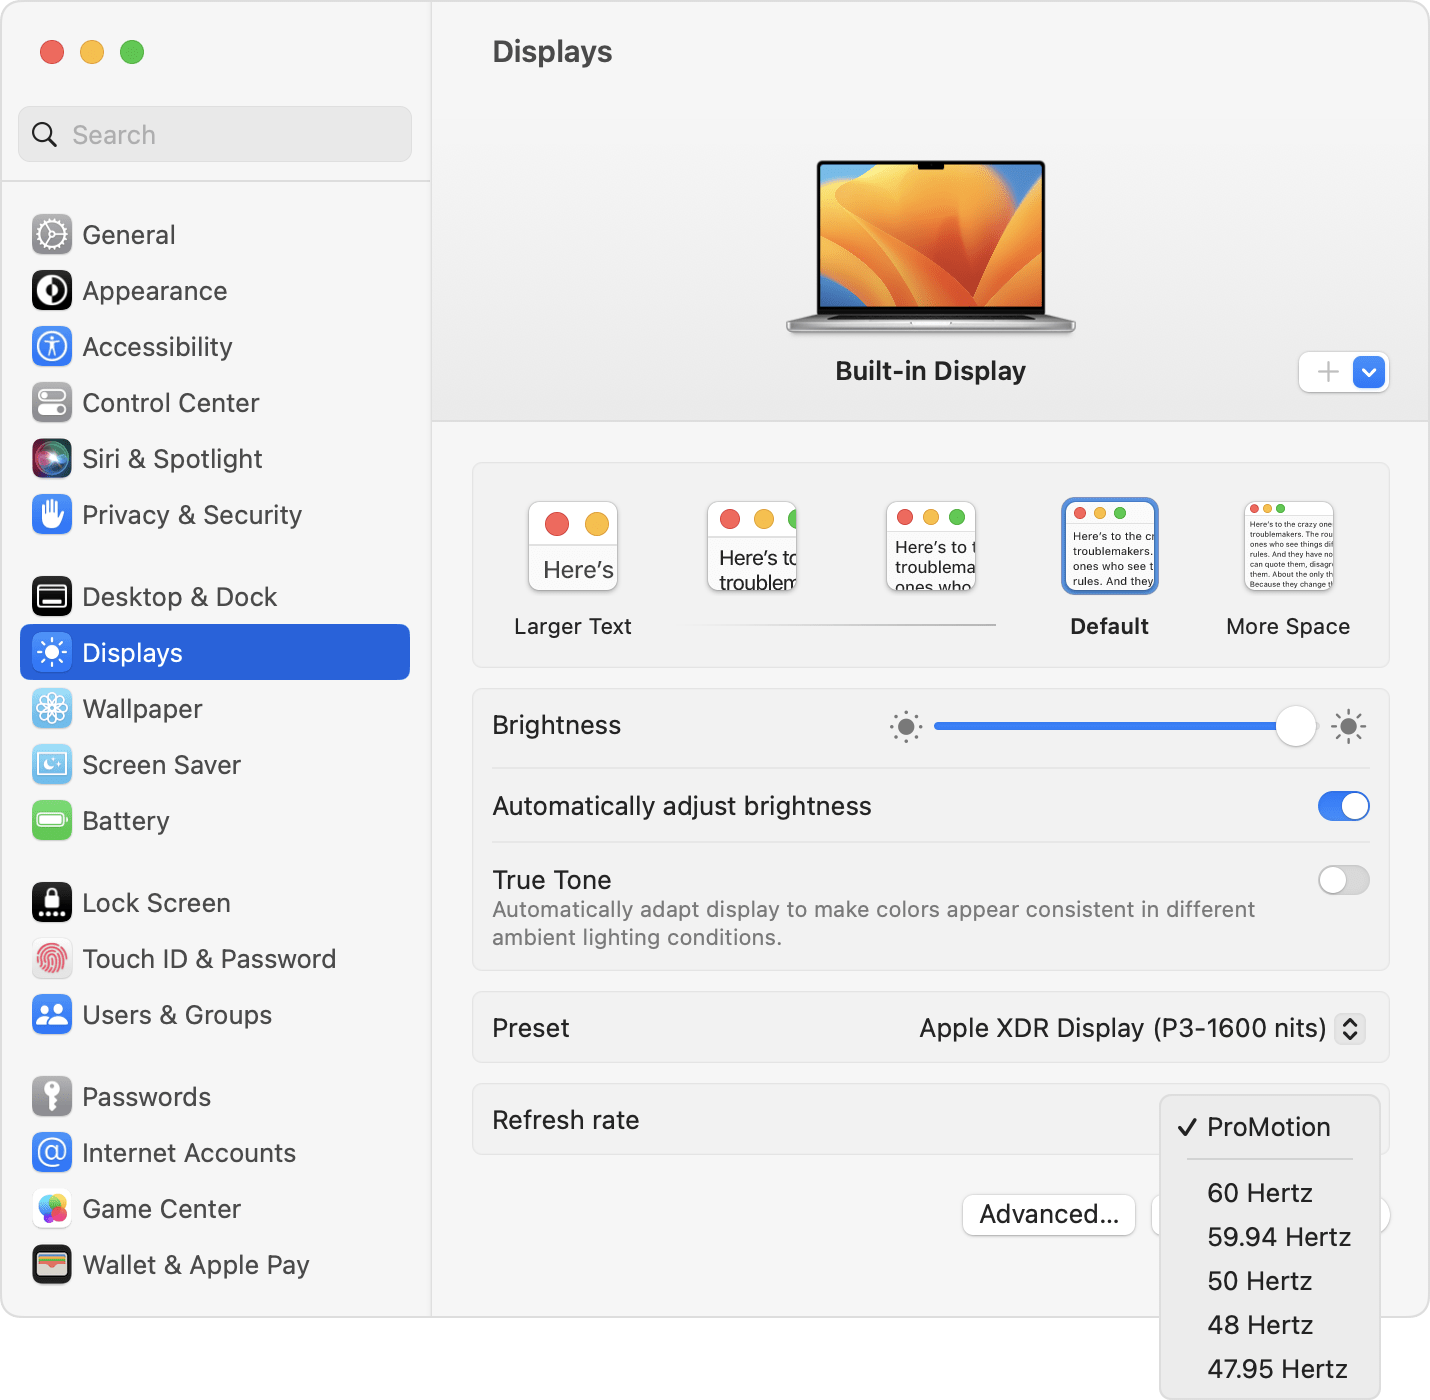 Connect your Macbook Pro or Macbook Air to a monitor, TV or projector